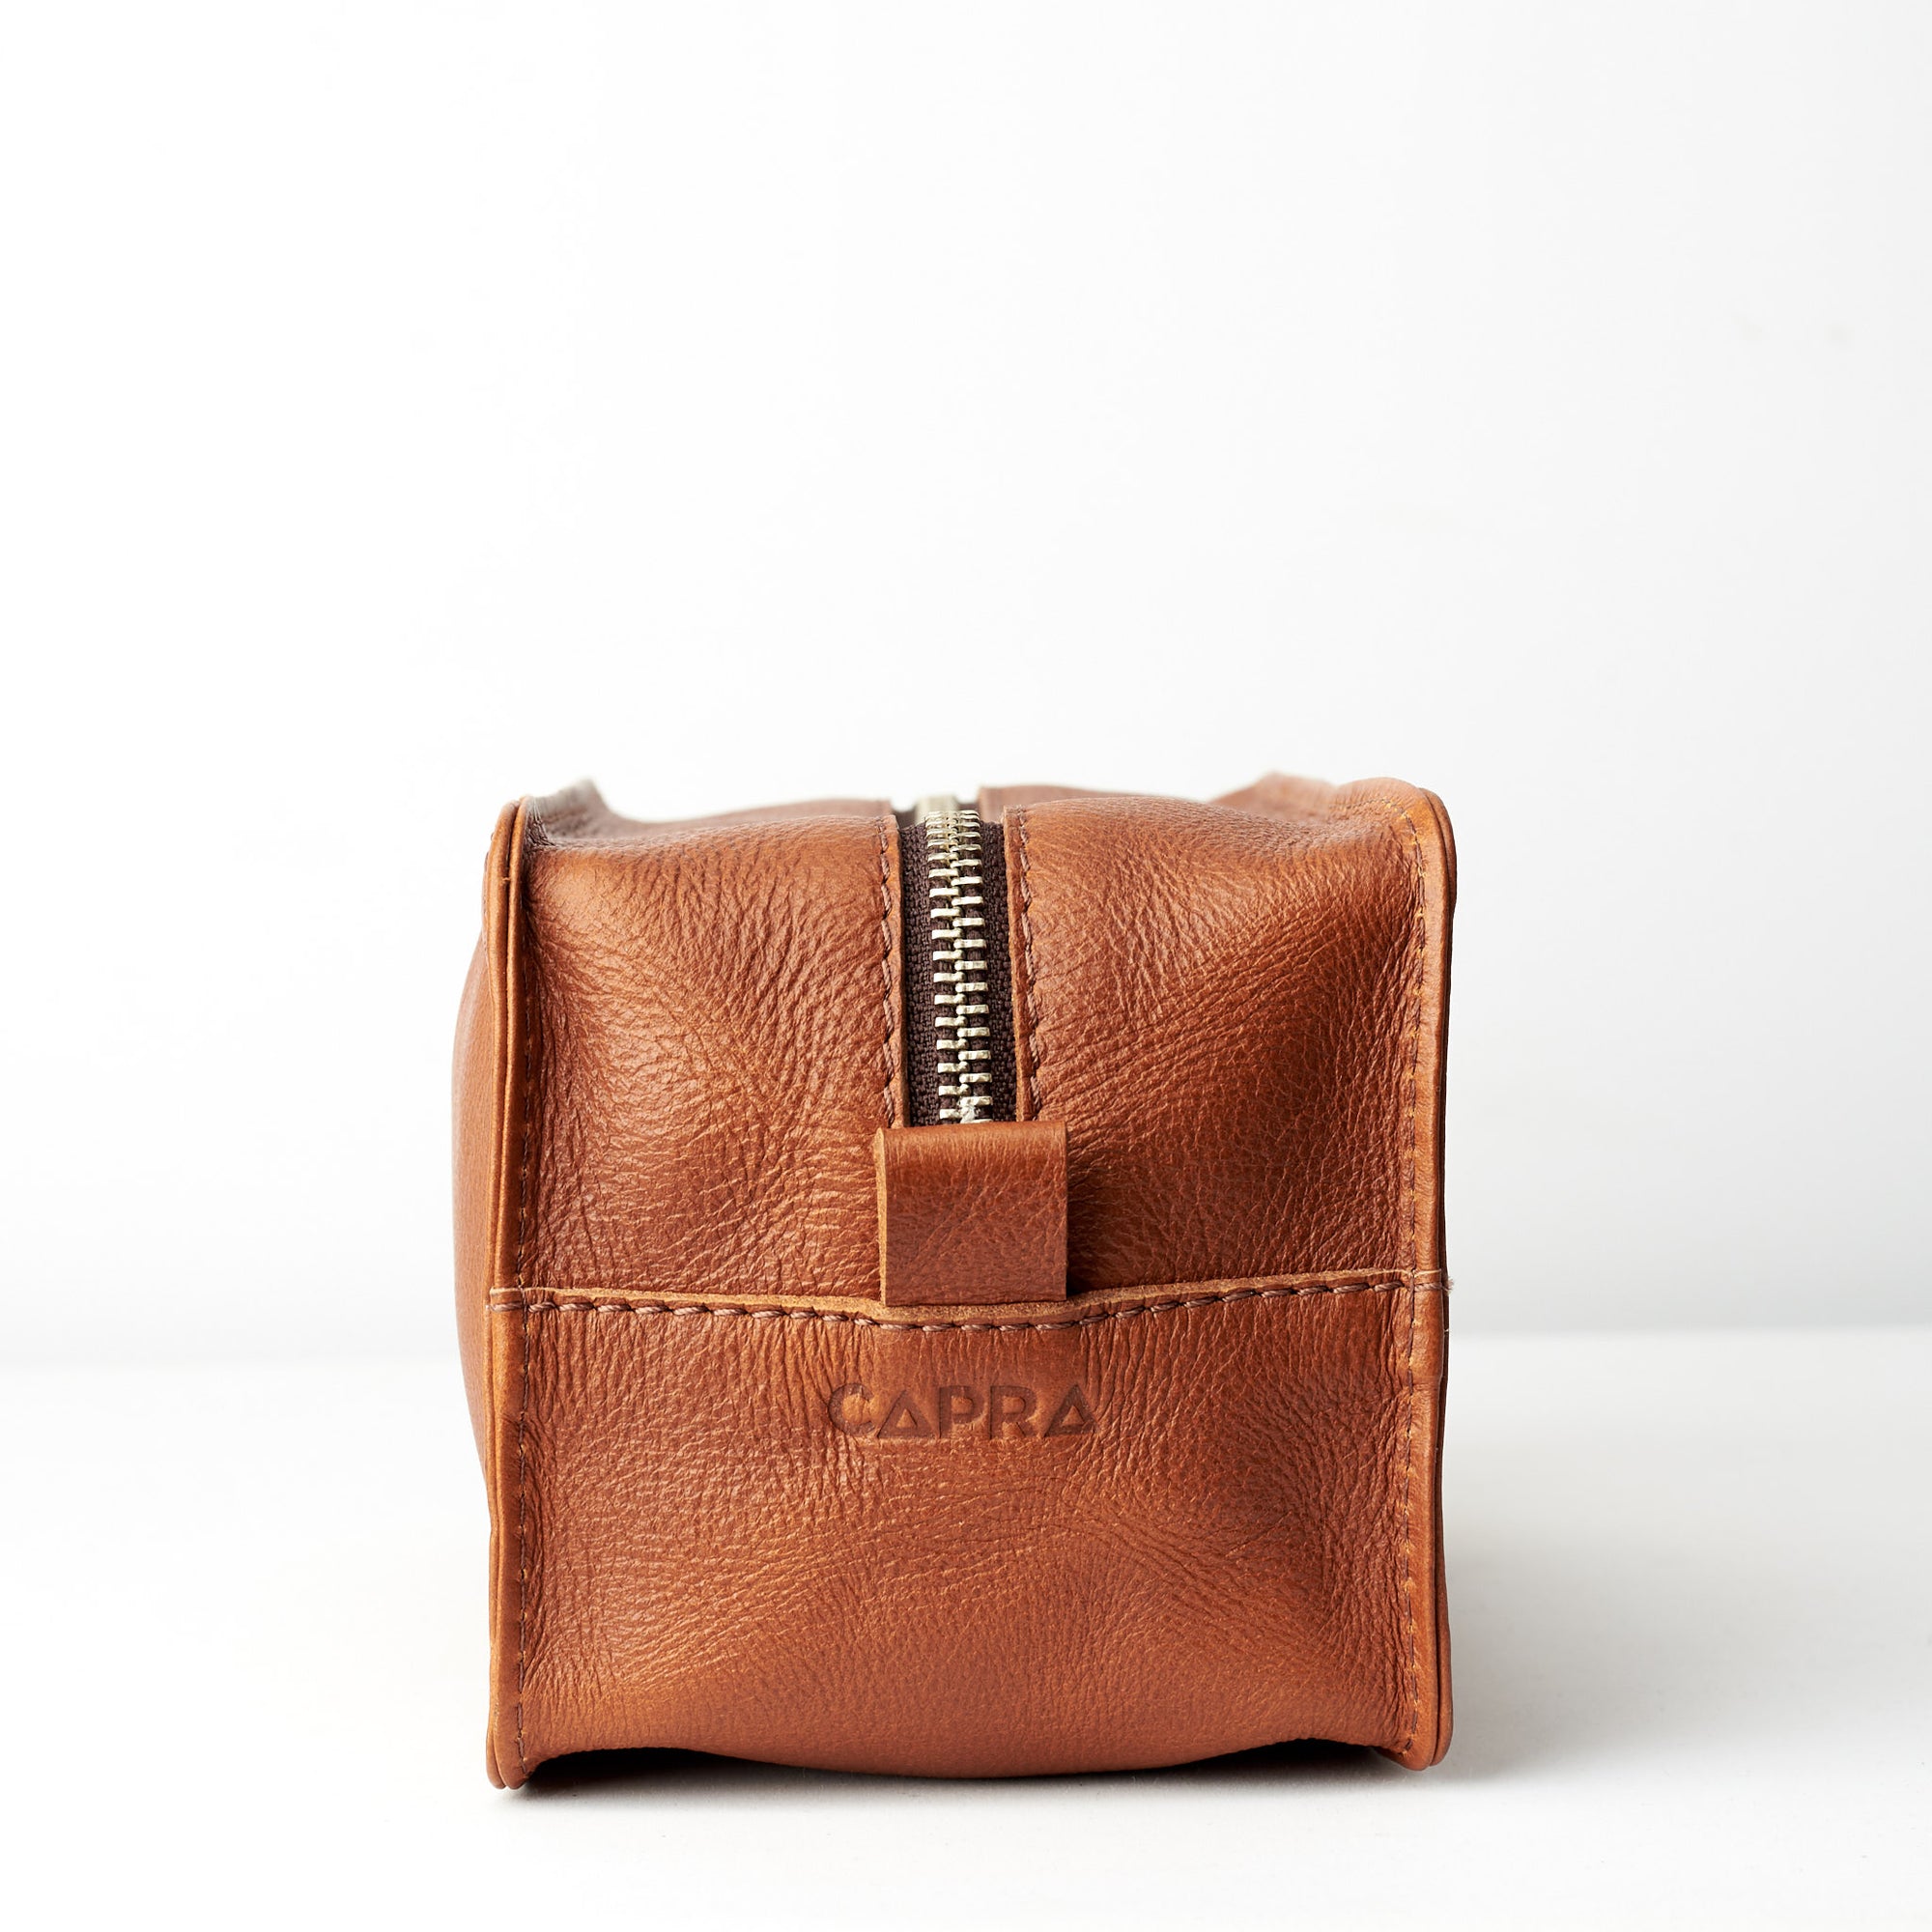 Zipper. Tan leather toiletry, shaving bag with hand stitched handle. Groomsmen gifts. Leather good crafted by Capra Leather 